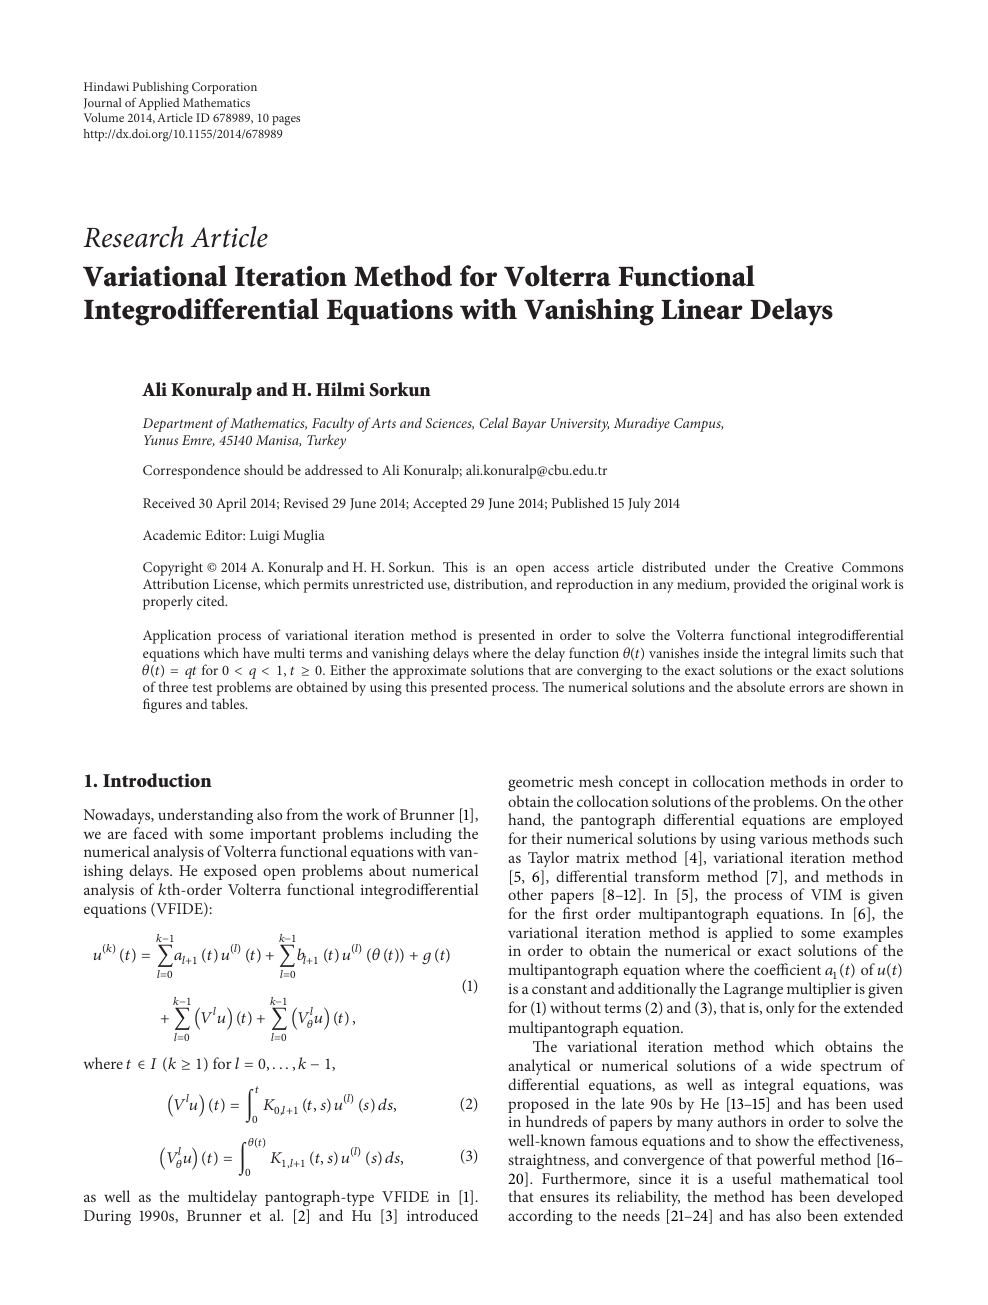 Variational Iteration Method For Volterra Functional Integrodifferential Equations With Vanishing Linear Delays Topic Of Research Paper In Mathematics Download Scholarly Article Pdf And Read For Free On Cyberleninka Open Science Hub